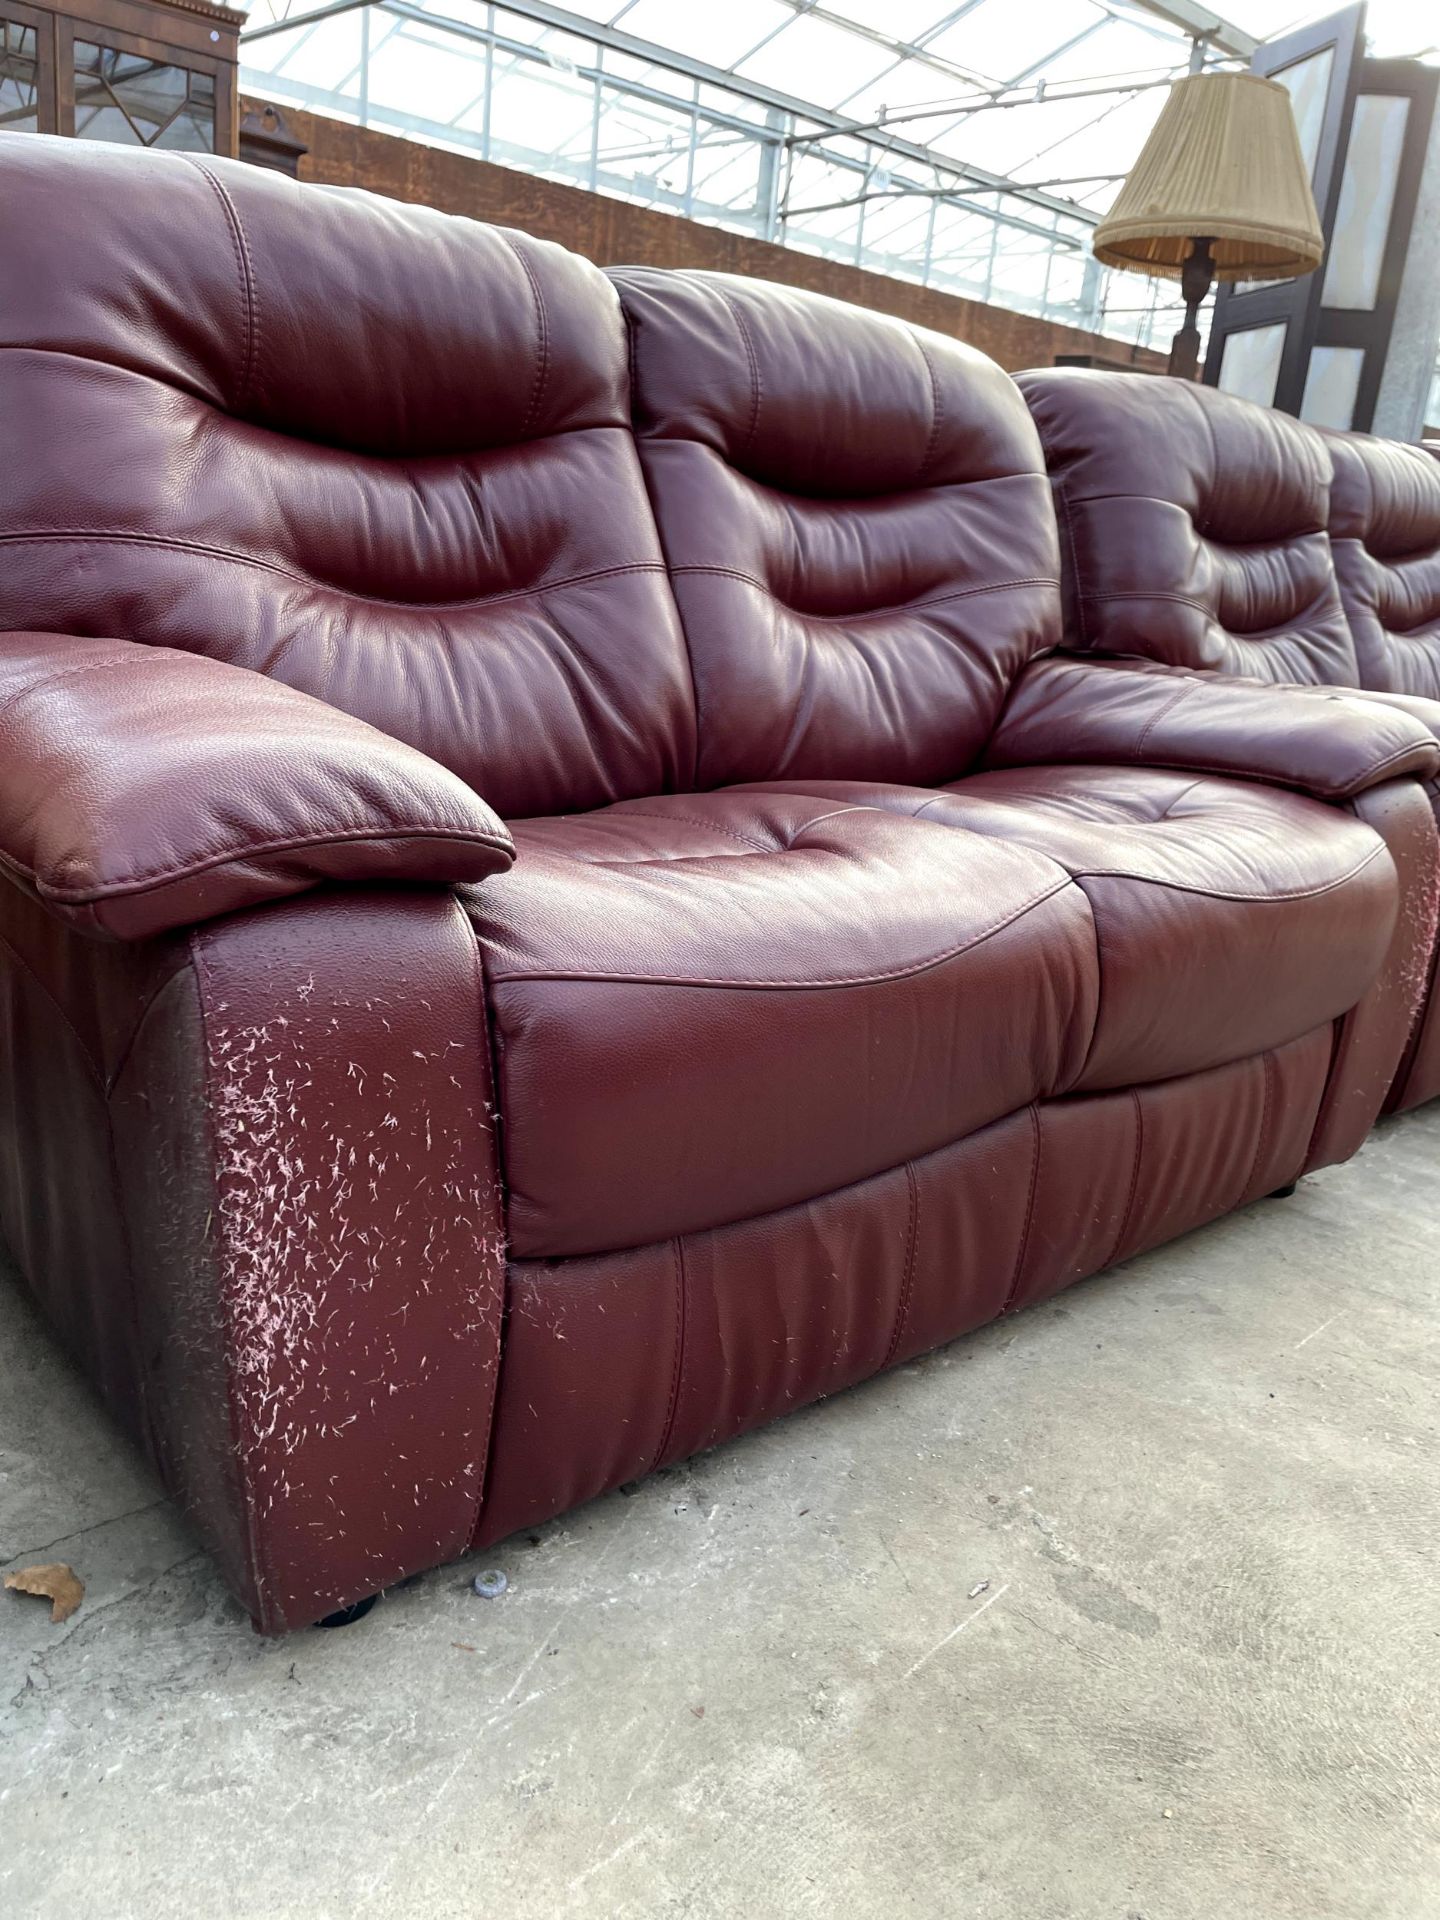 A MODERN LEATHER TWO SEATER SETTEE - Image 2 of 2